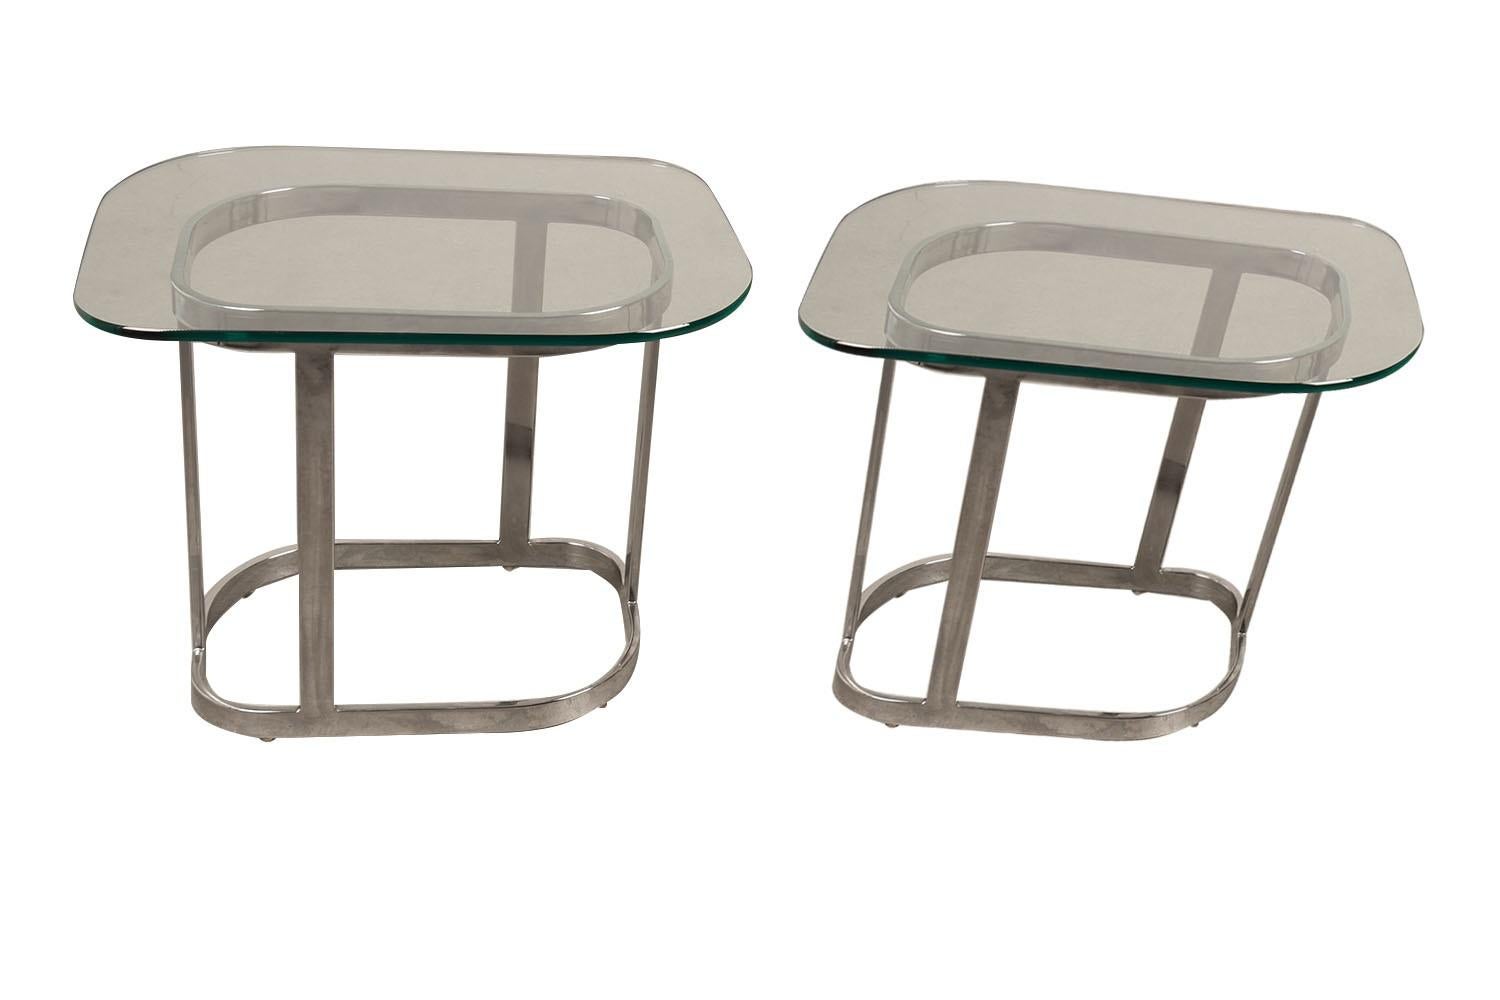 An extraordinary mid-century pair of glass side tables with modernist design elegant and luscious. Each feature original 3/8″ thick glass resting on a chrome-plated base with 1/2″ thick chrome flat-bars, creating a nice contemporary look, truly